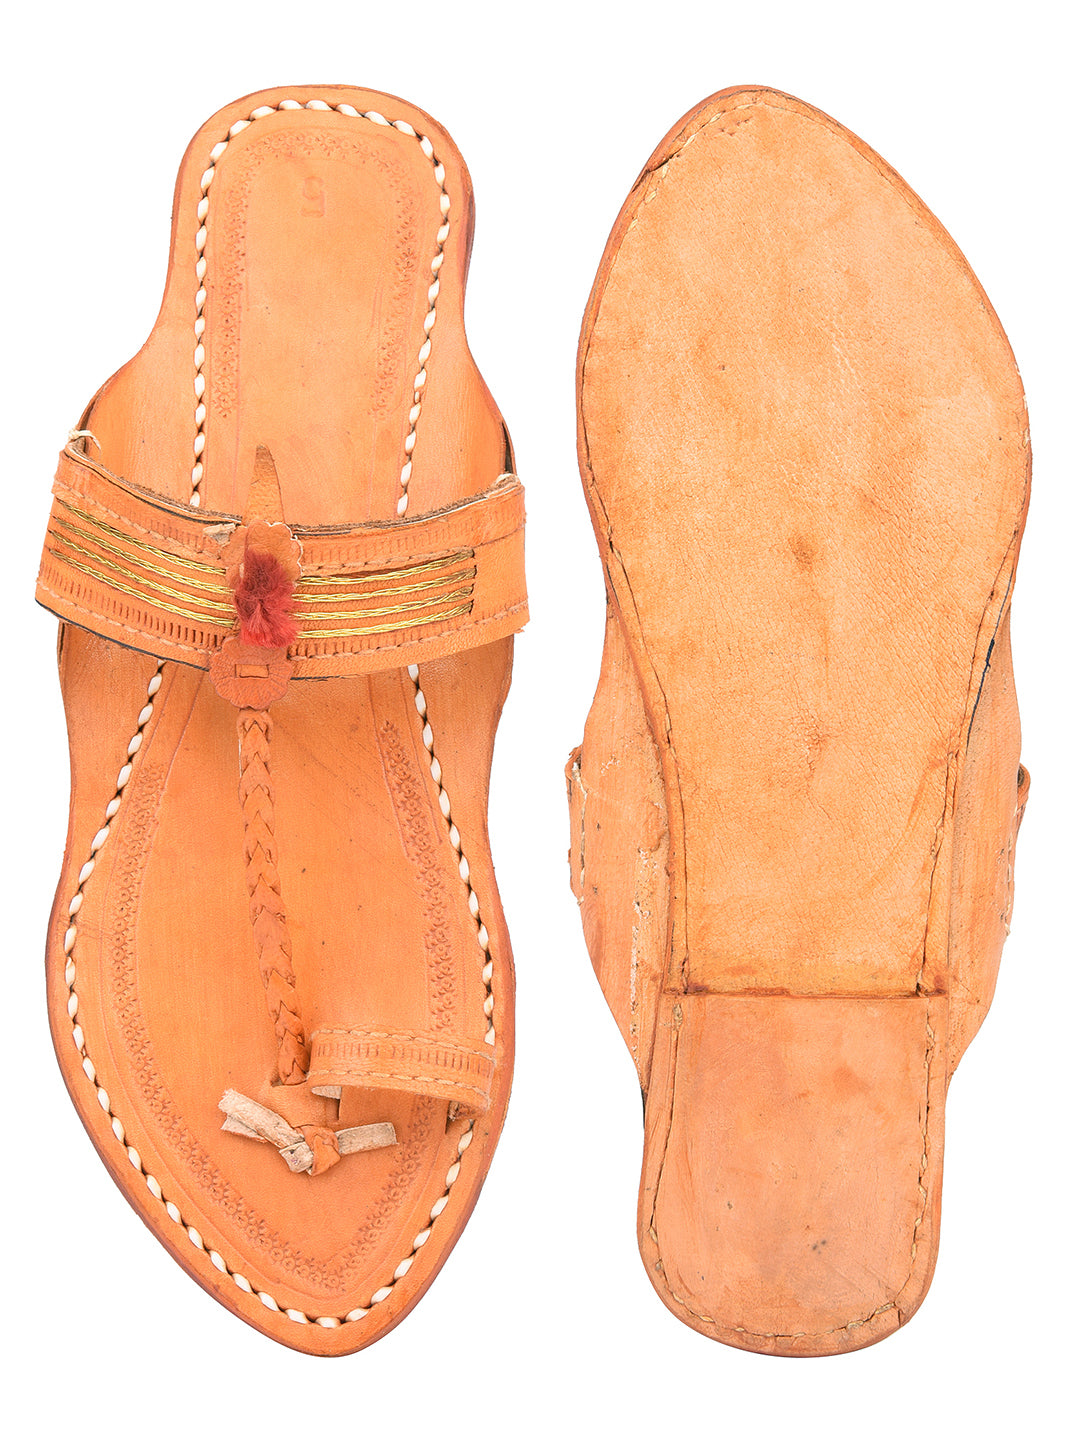 DESI COLOUR Women Tan Brown Textured Leather Ethnic One Toe Flats